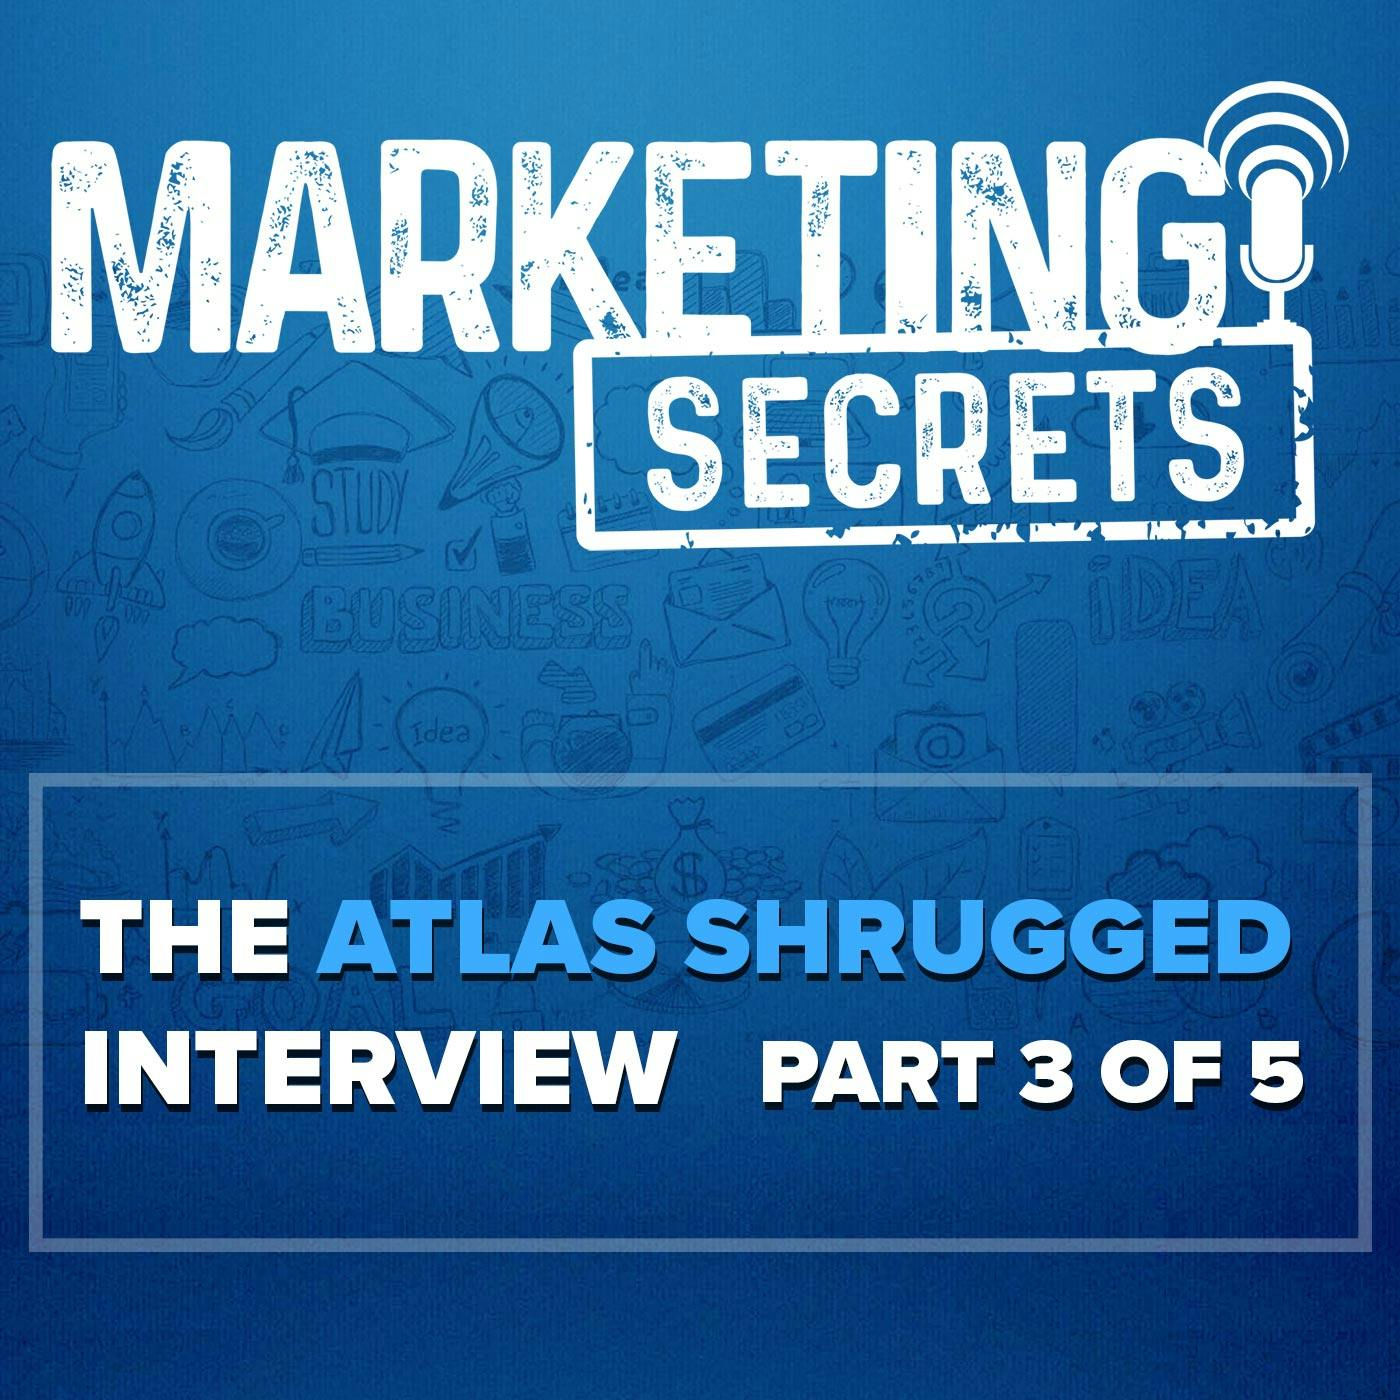 The Atlas Shrugged Interview - Part 3 of 5